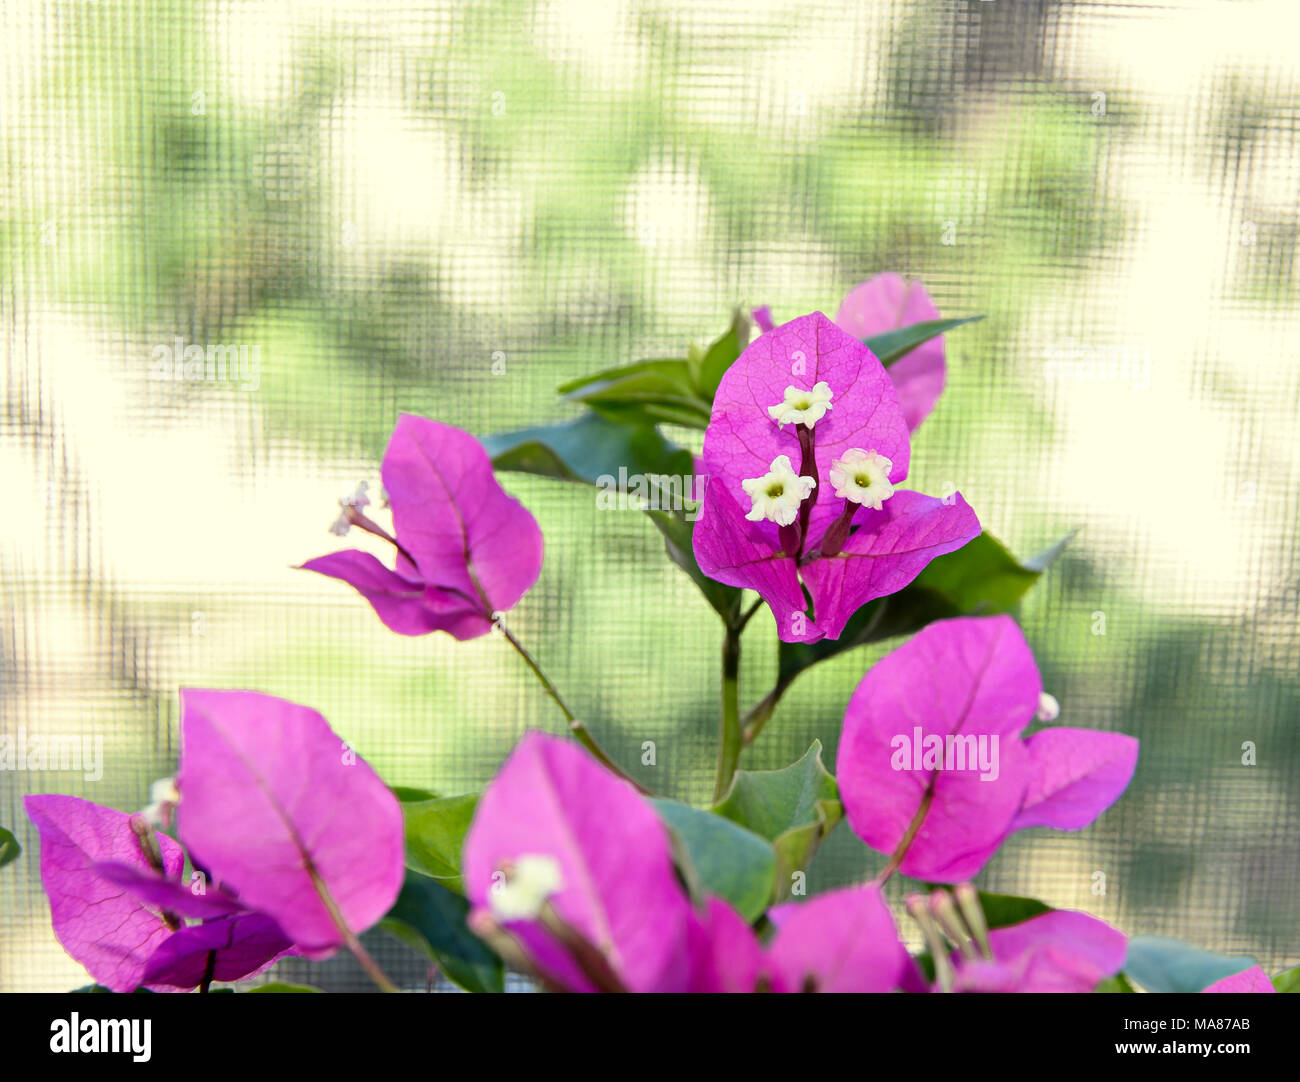 Bougainvillea pink ornamental flowers, paper flower branch with green leafs in a pot. Stock Photo